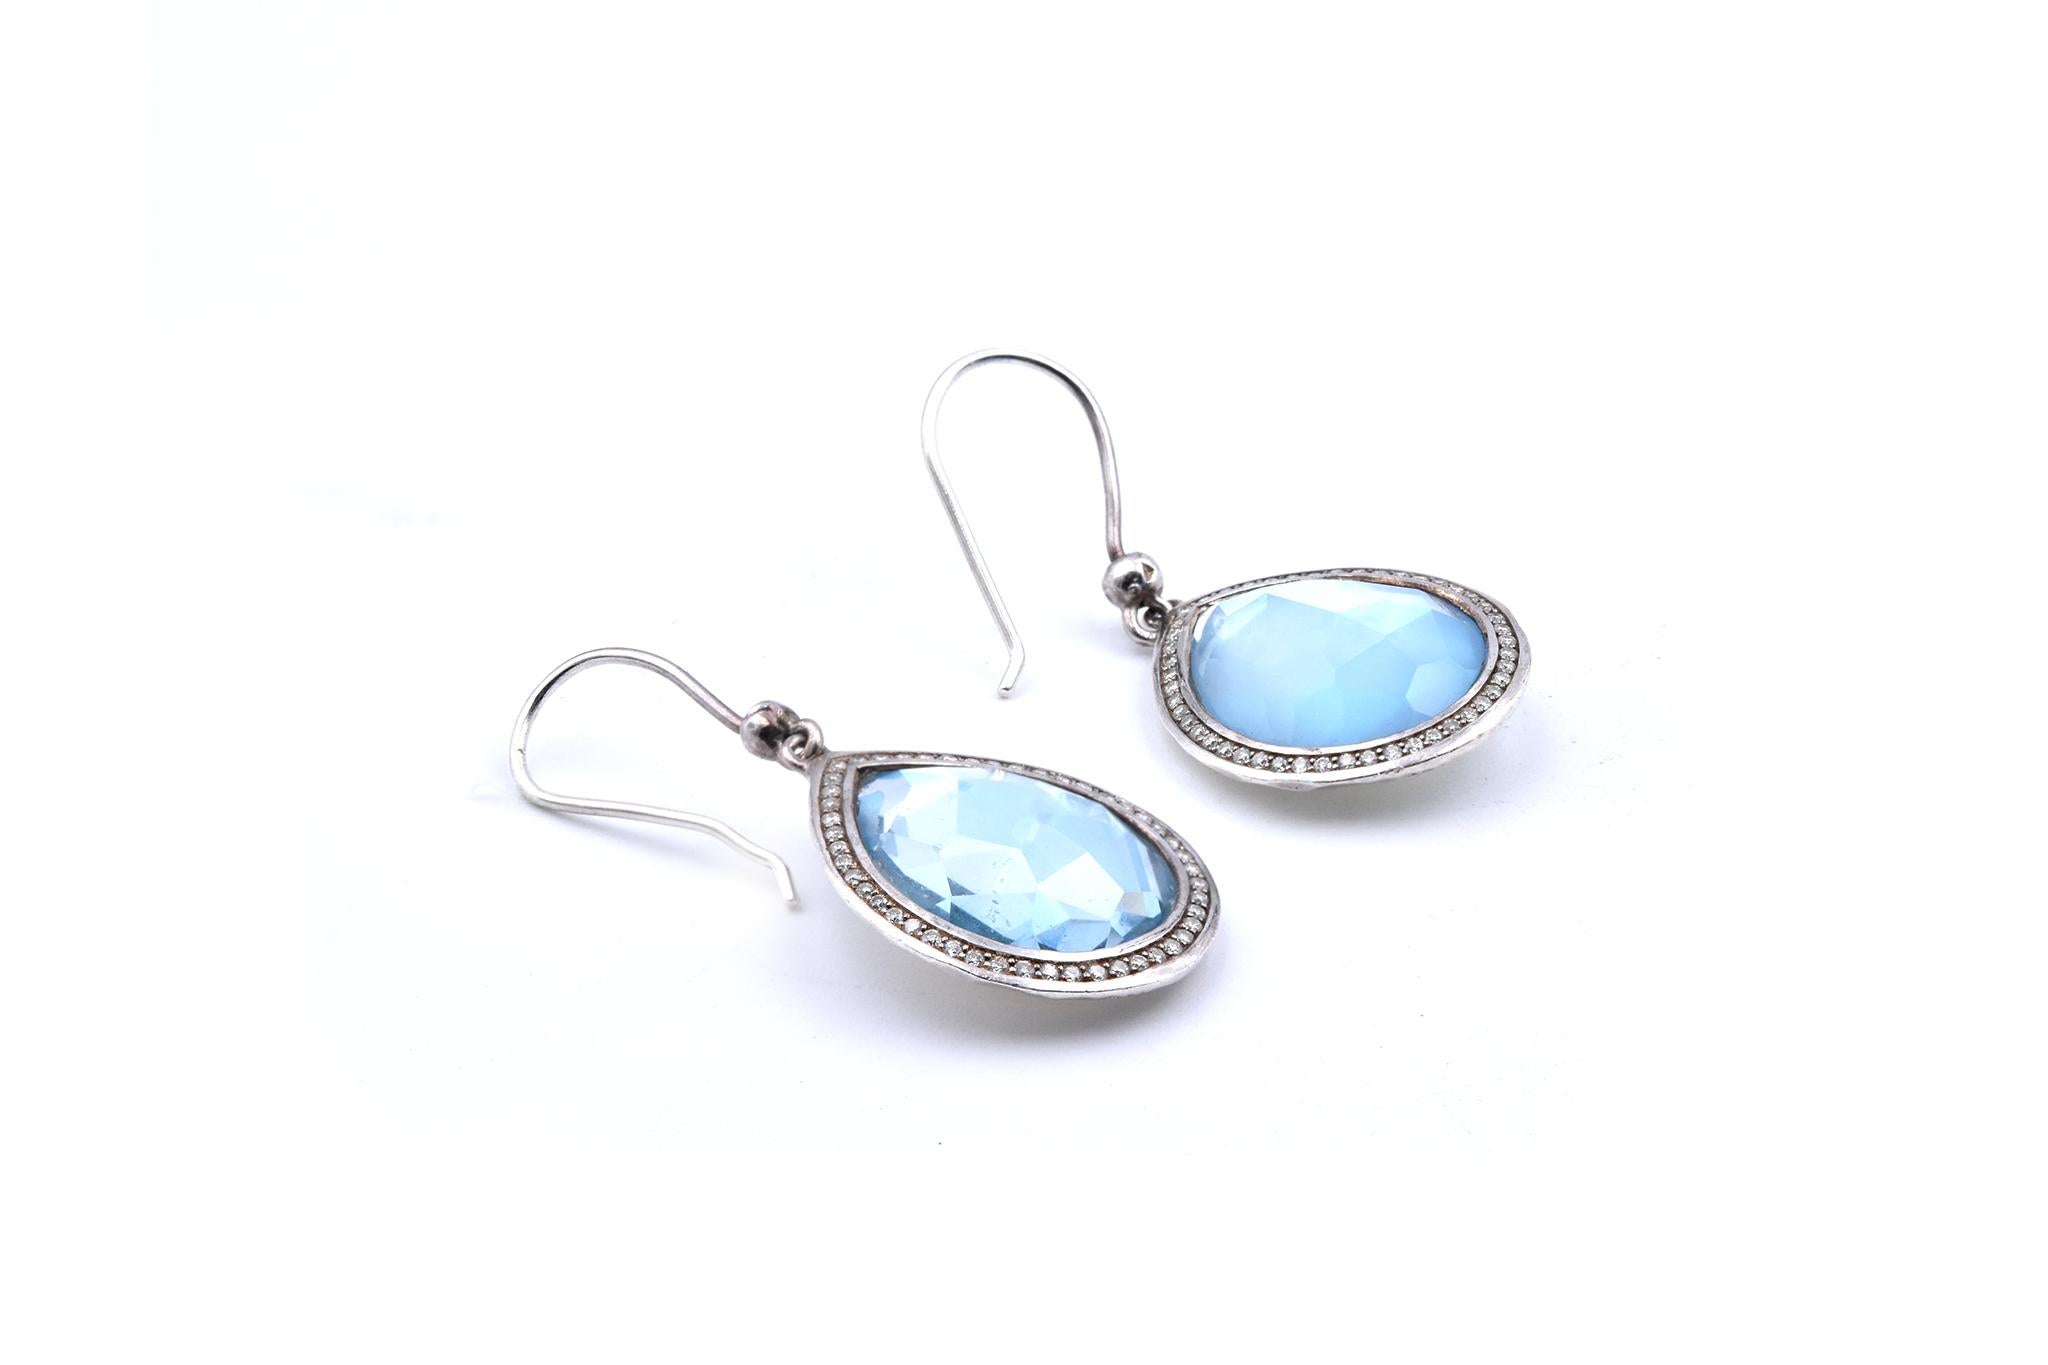 Designer: Ippolita
Material: sterling silver
Weight: 5.89 grams
Diamonds: .38cttw round cut 
Color: G
Clarity: VS
Measurement: earrings measures 36mm 
